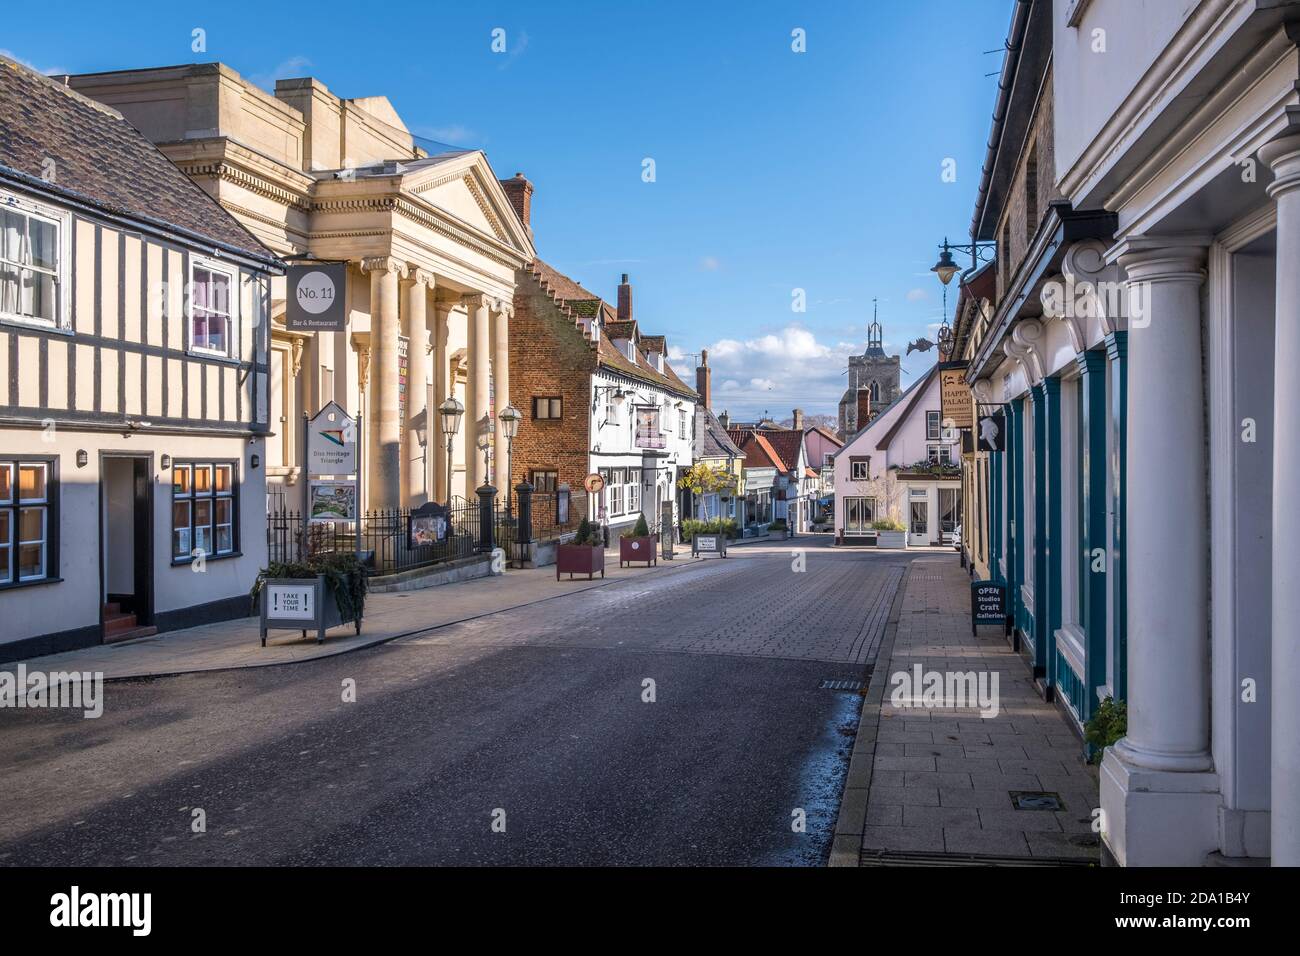 St Nicholas Street, Diss, Norfolk, UK. The Corn Hall on left (yellow building). Part of the Diss heritage triangle. Stock Photo